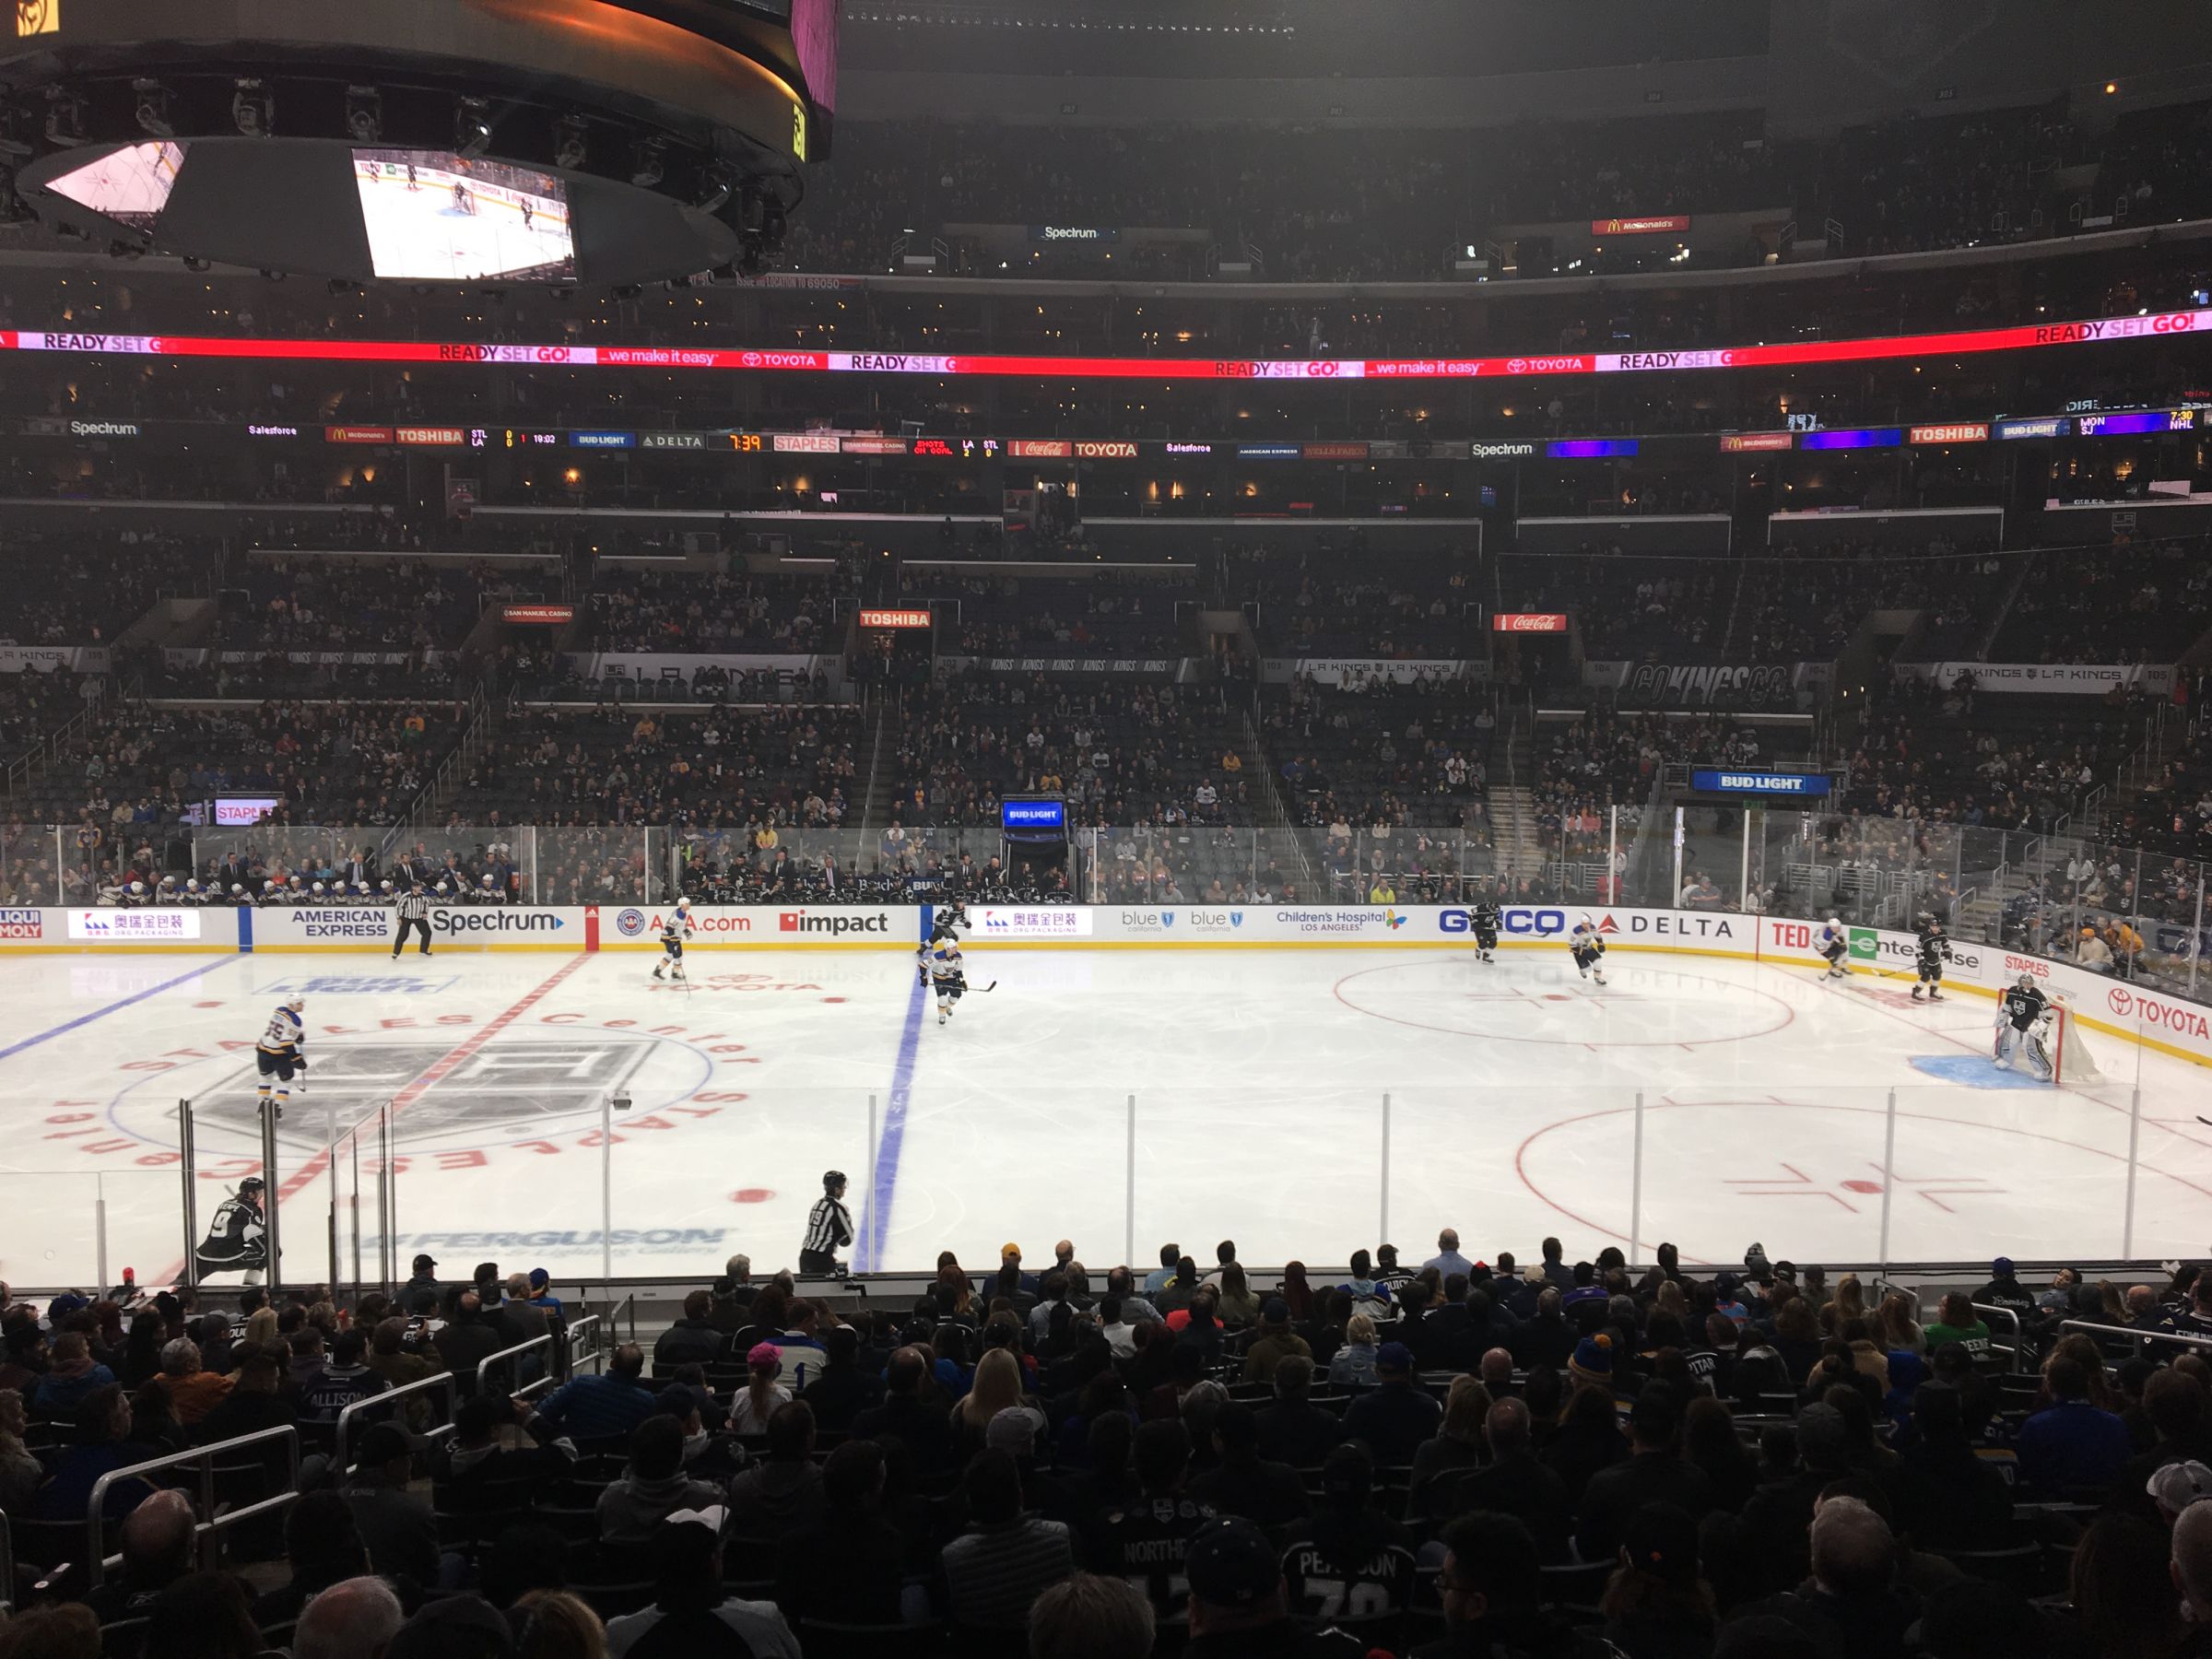 section 110, row 20 seat view  for hockey - crypto.com arena